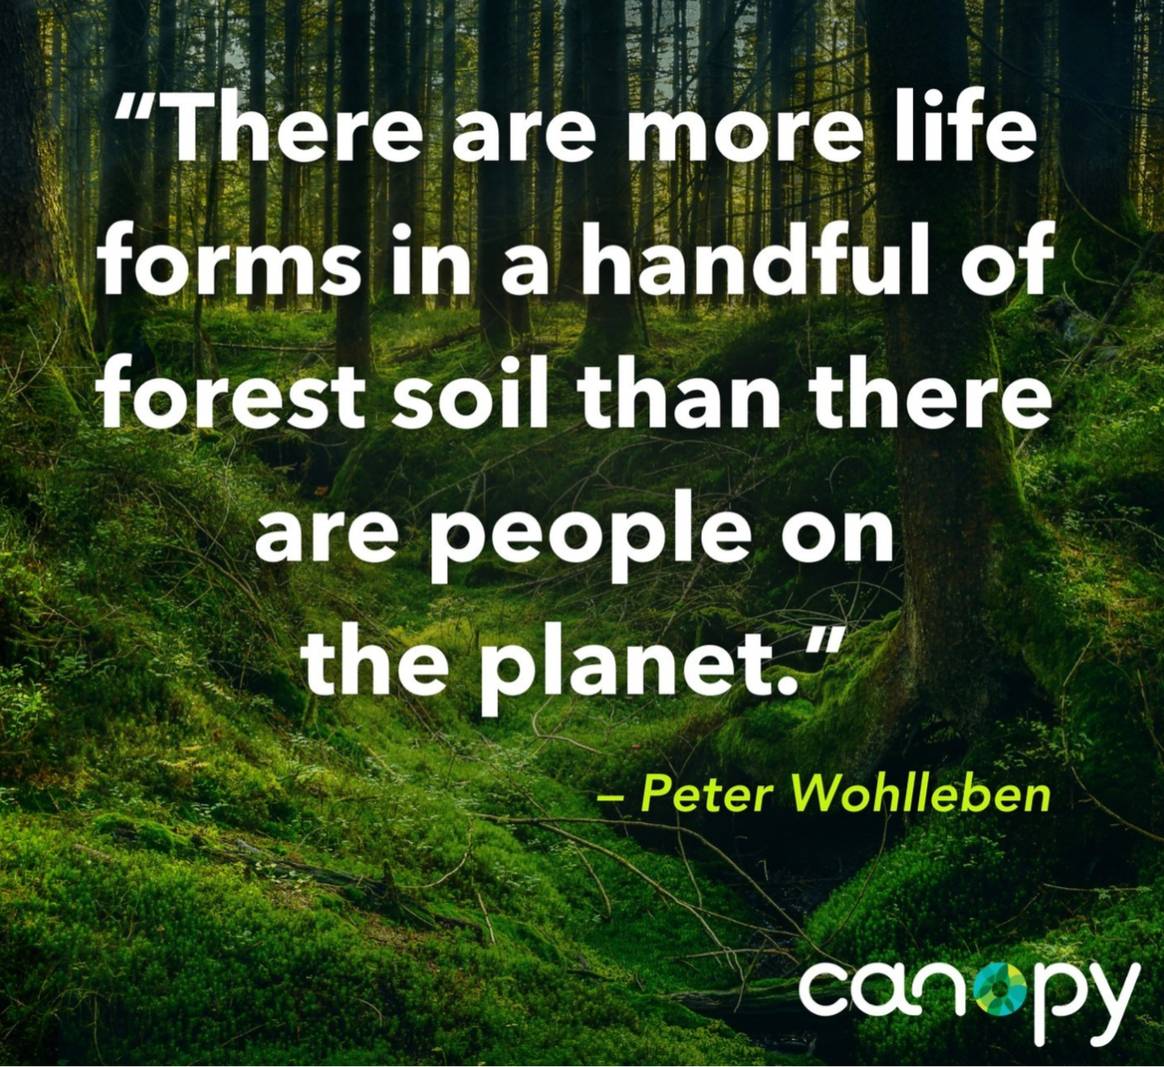 “There are more life forms in a handful of forest soil than there are people on the planet.